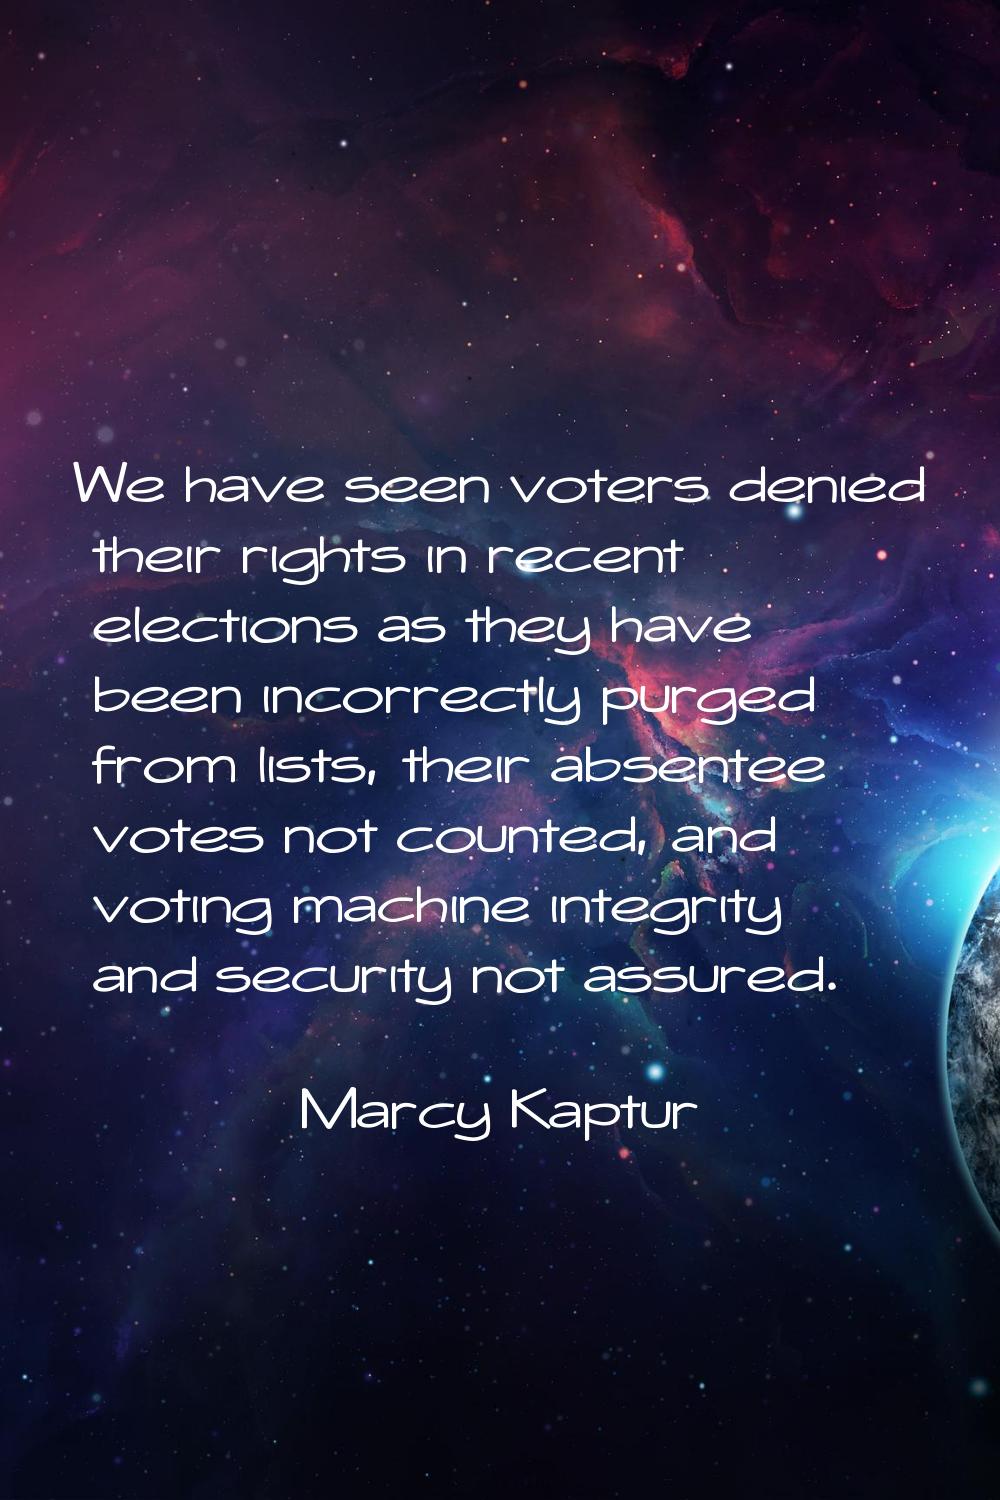 We have seen voters denied their rights in recent elections as they have been incorrectly purged fr